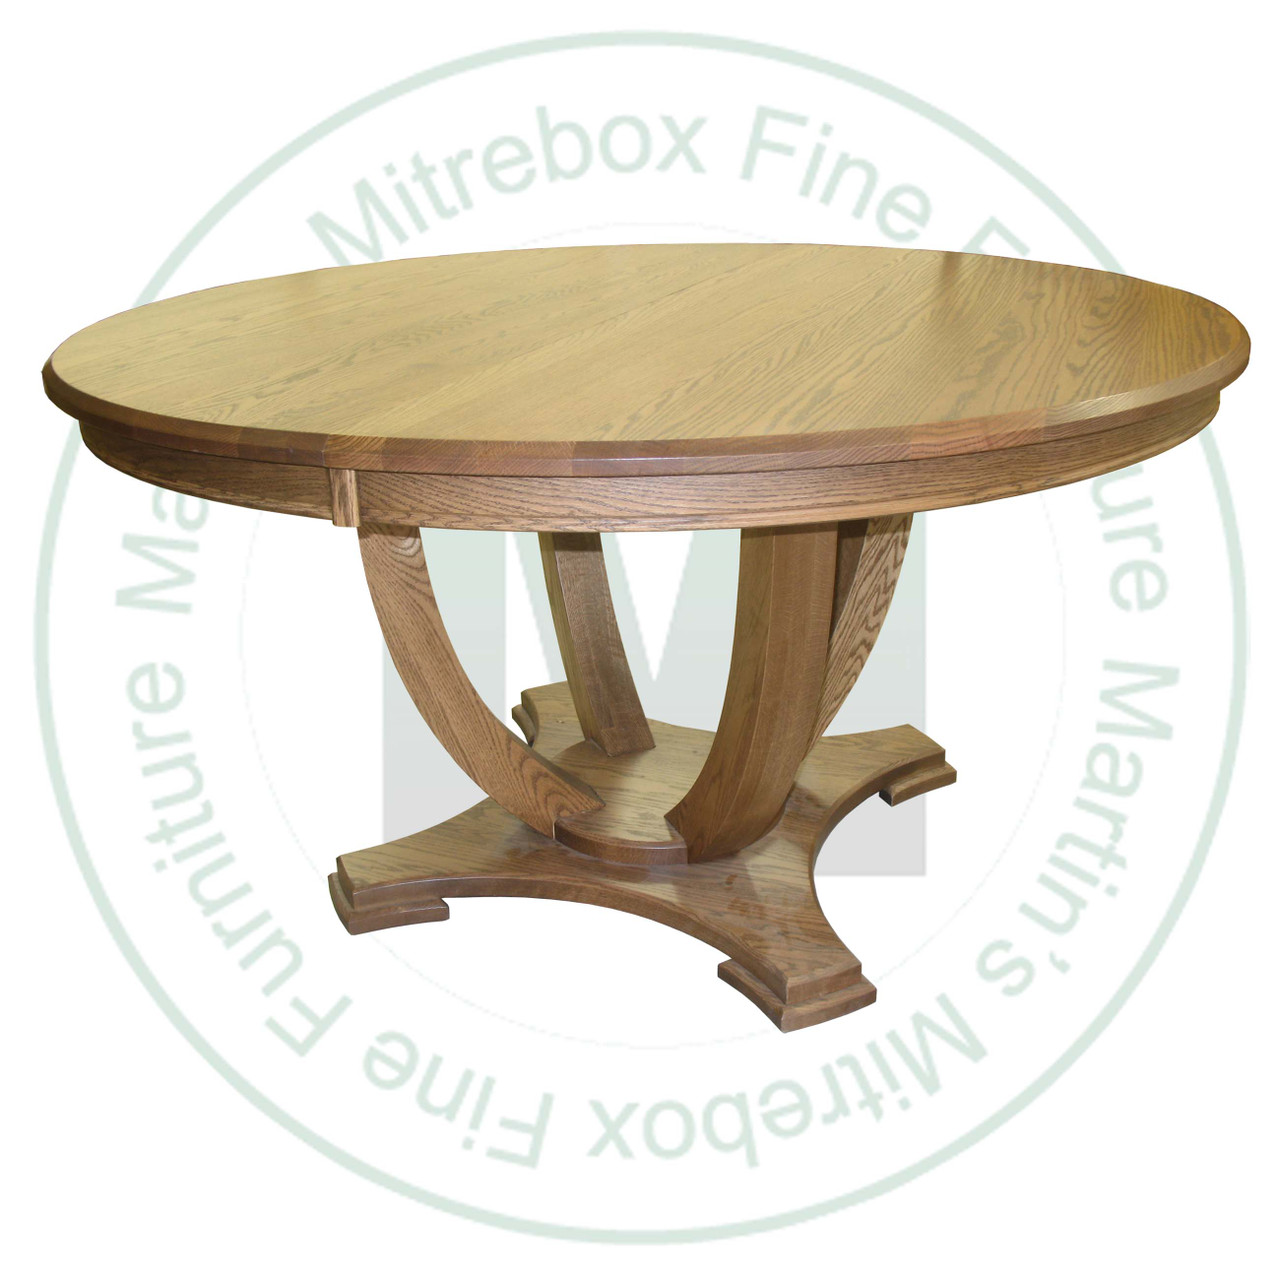 Oak Tuscany Single Pedestal Table 60''D x 60''W x 30''H Round Solid Top